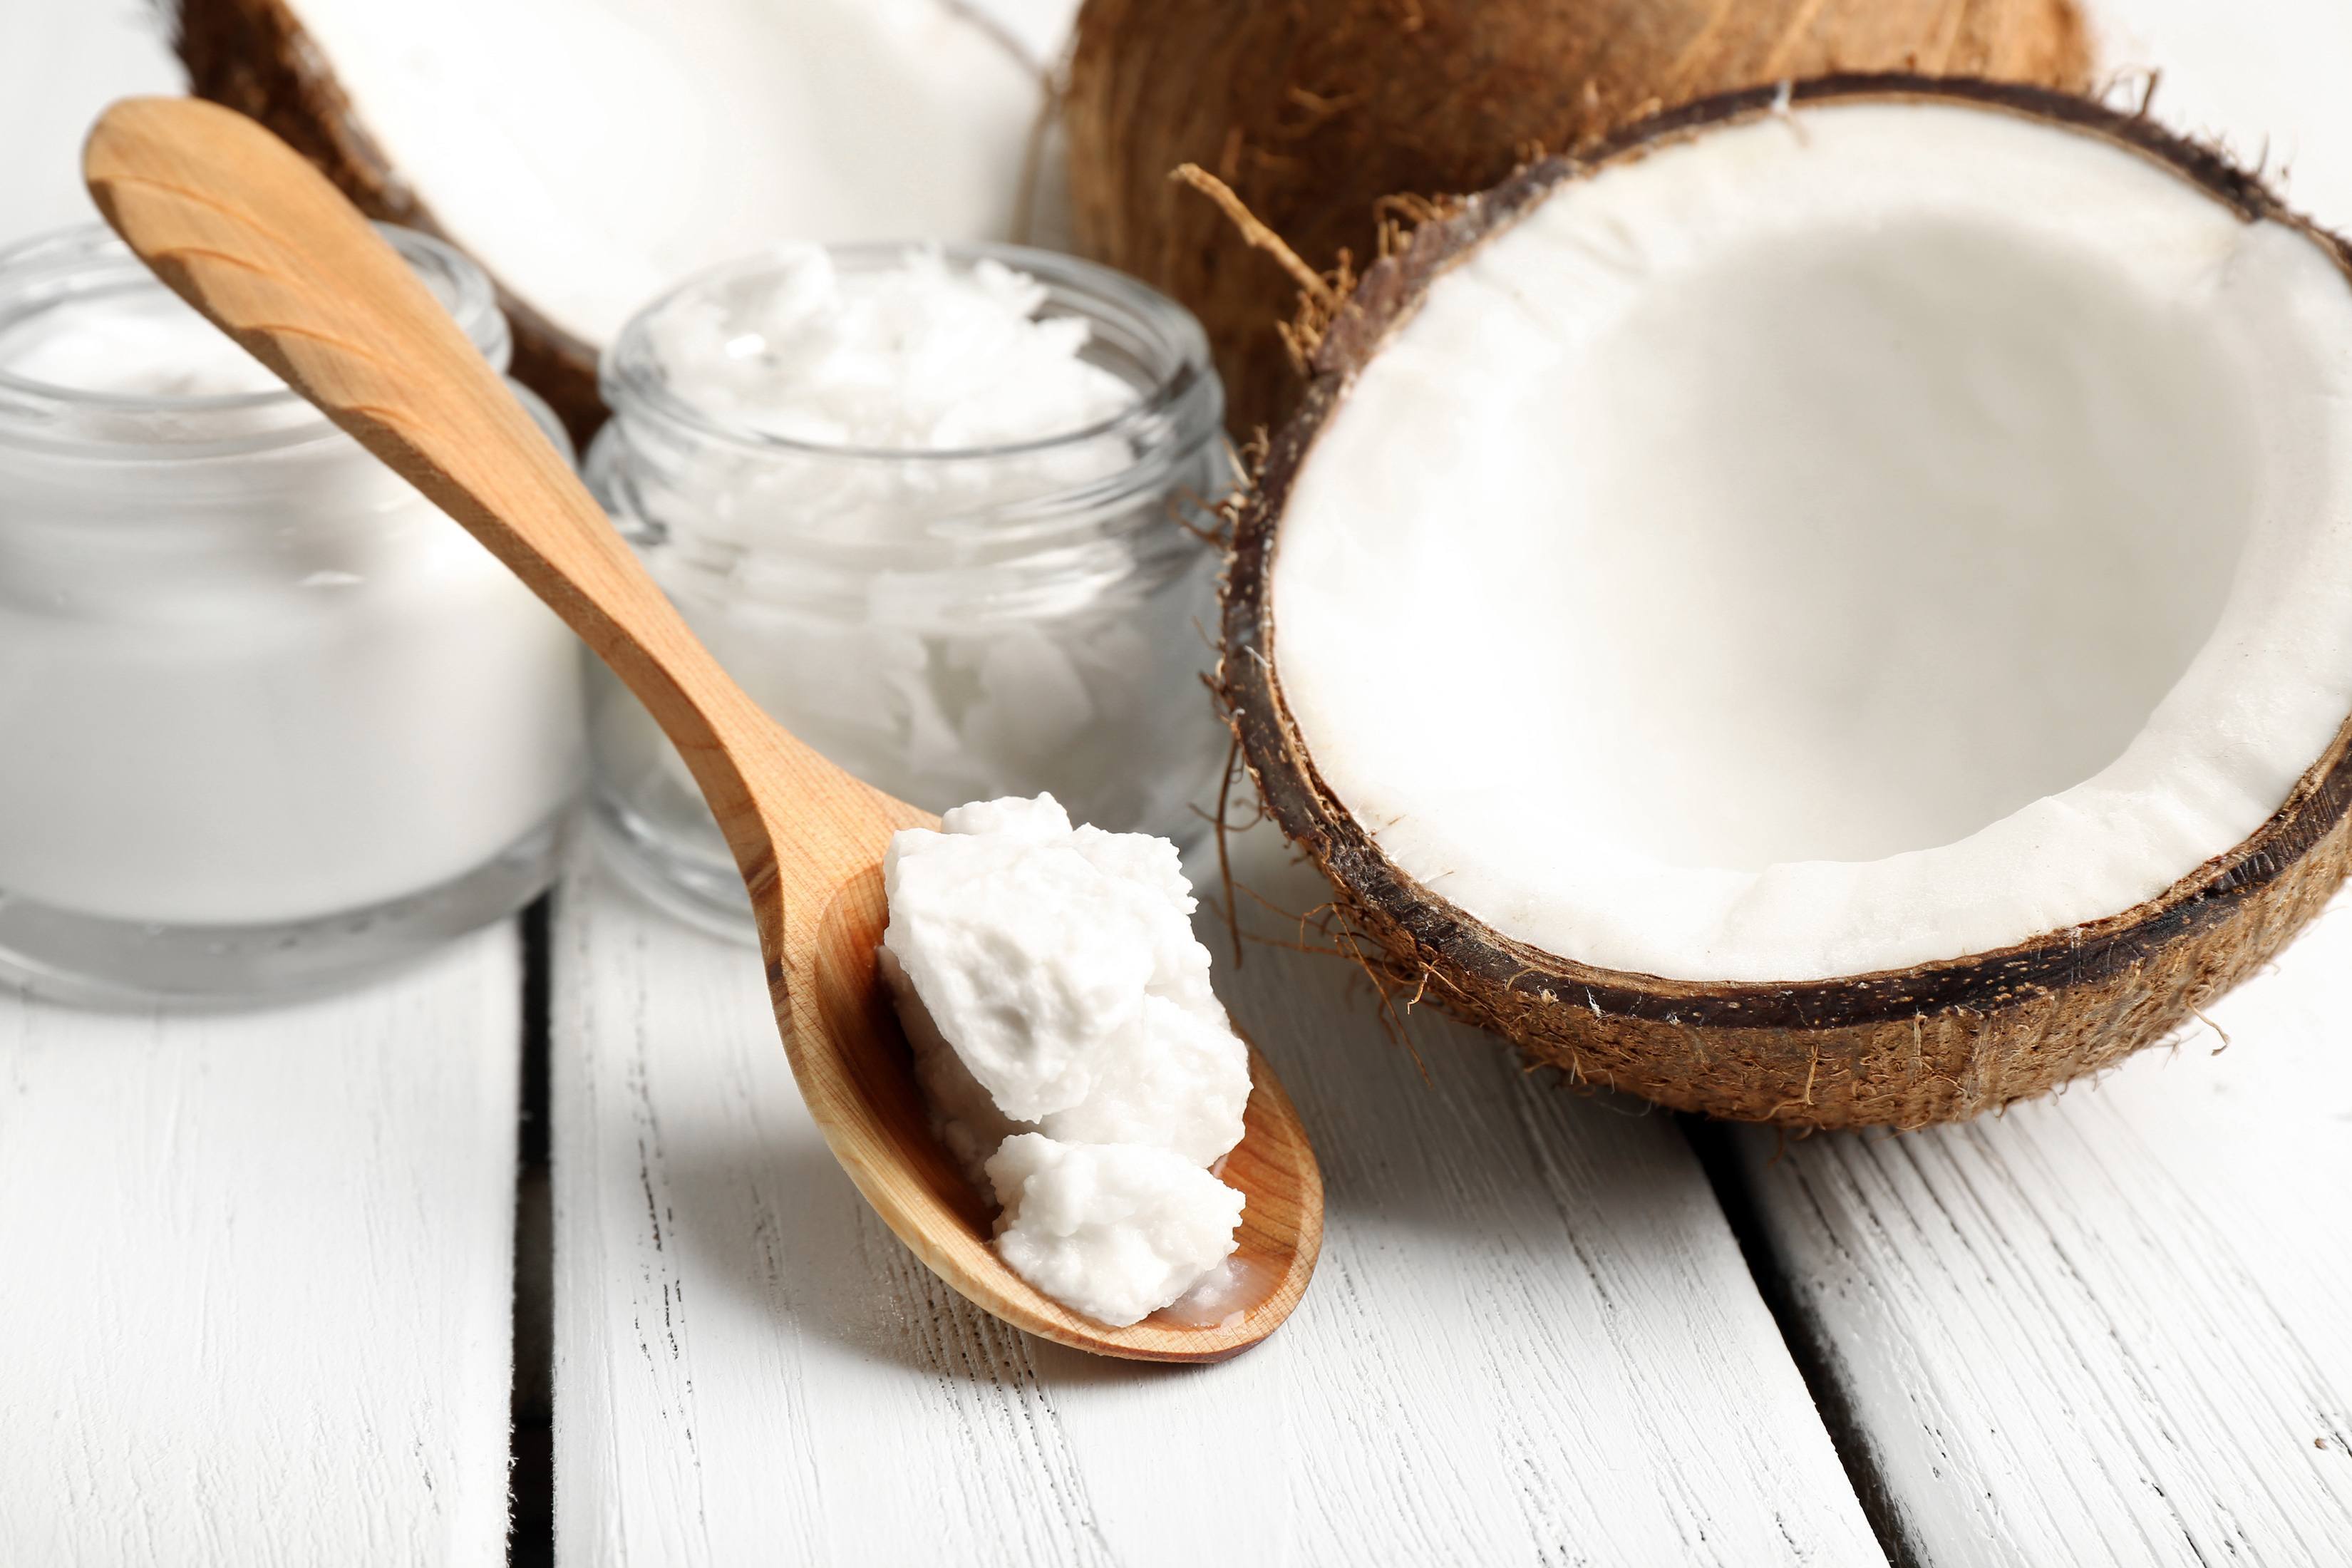 All-rounder: 5 benefits of coconut oil